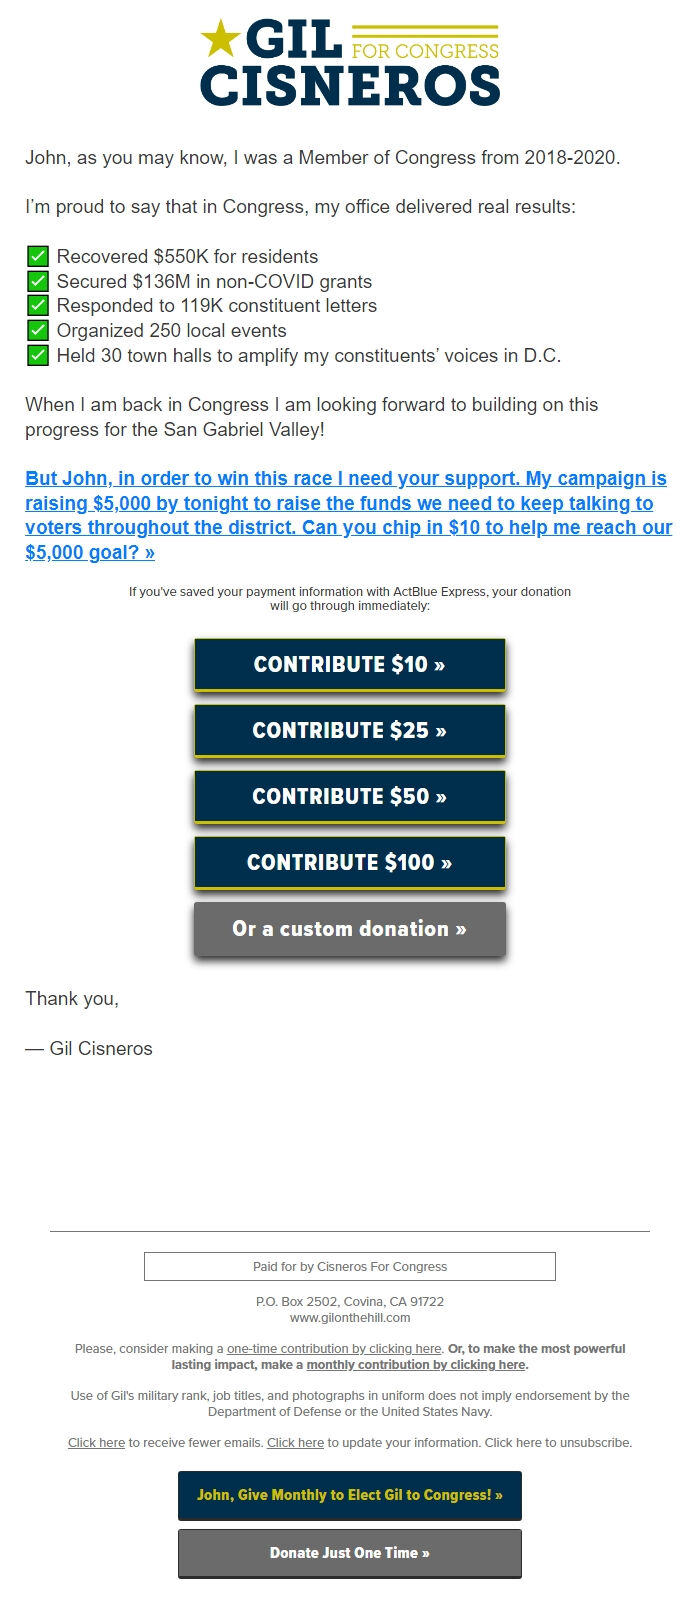 Screenshot of the email generated on import